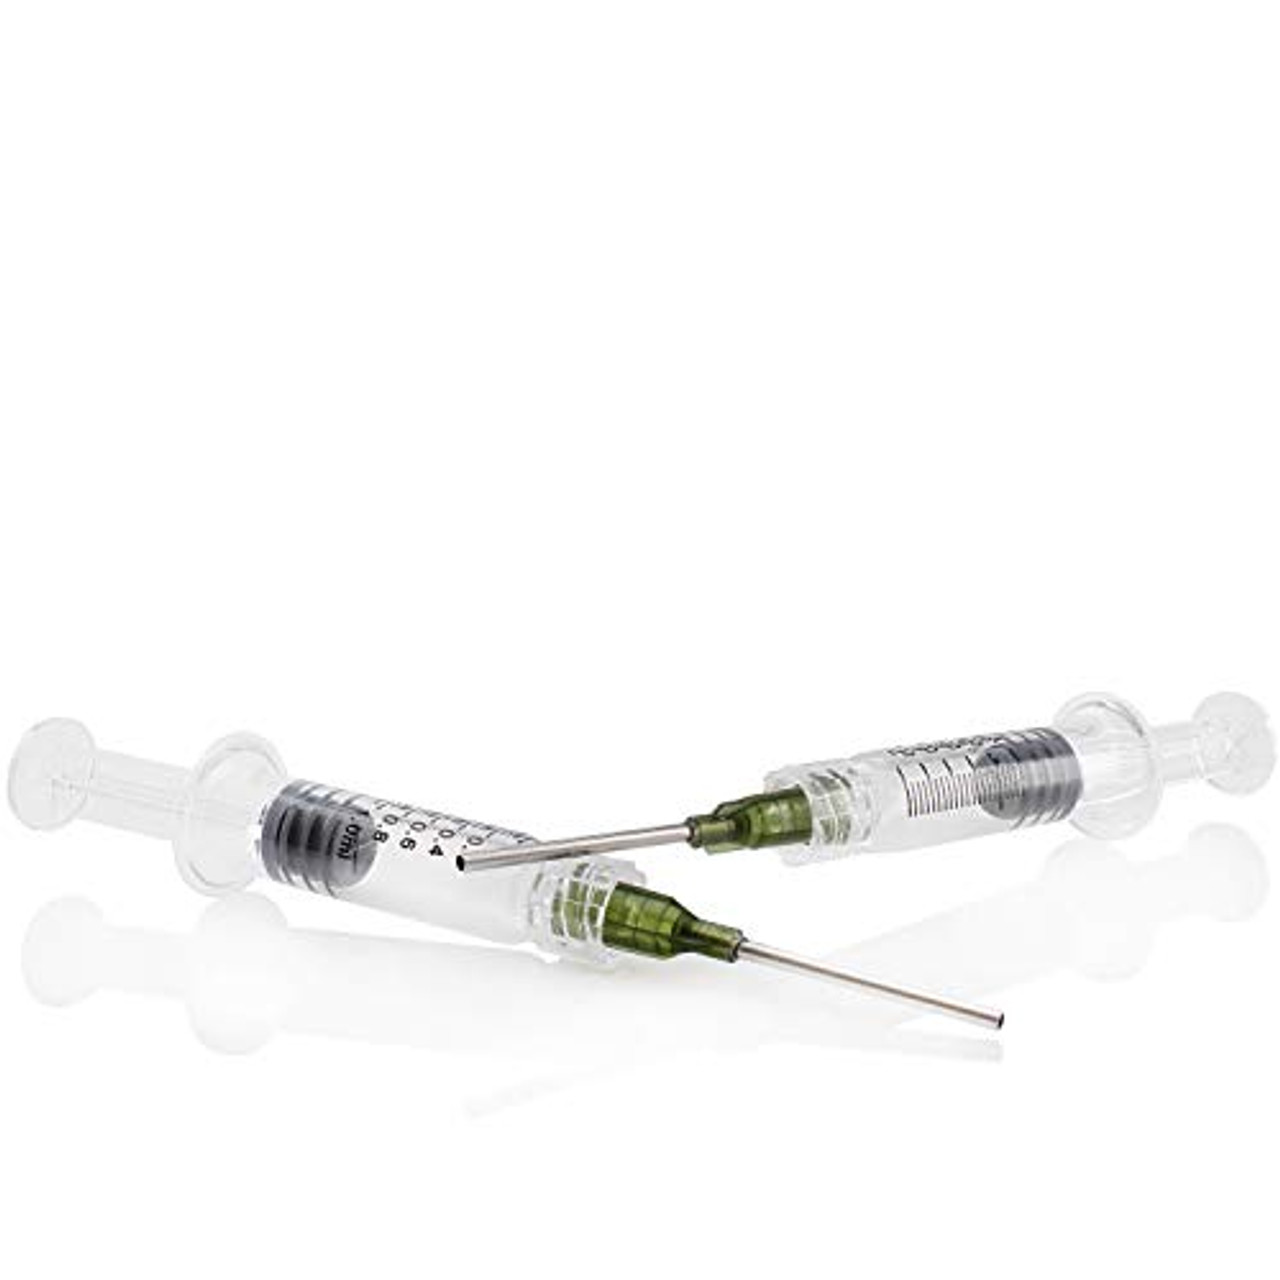 Dispensing Needle with Cap, Sterile Disposable Injection Luer Lock Luer  Slip Syringe Accessories, Individually Sealed for Lab, Refilling Liquid